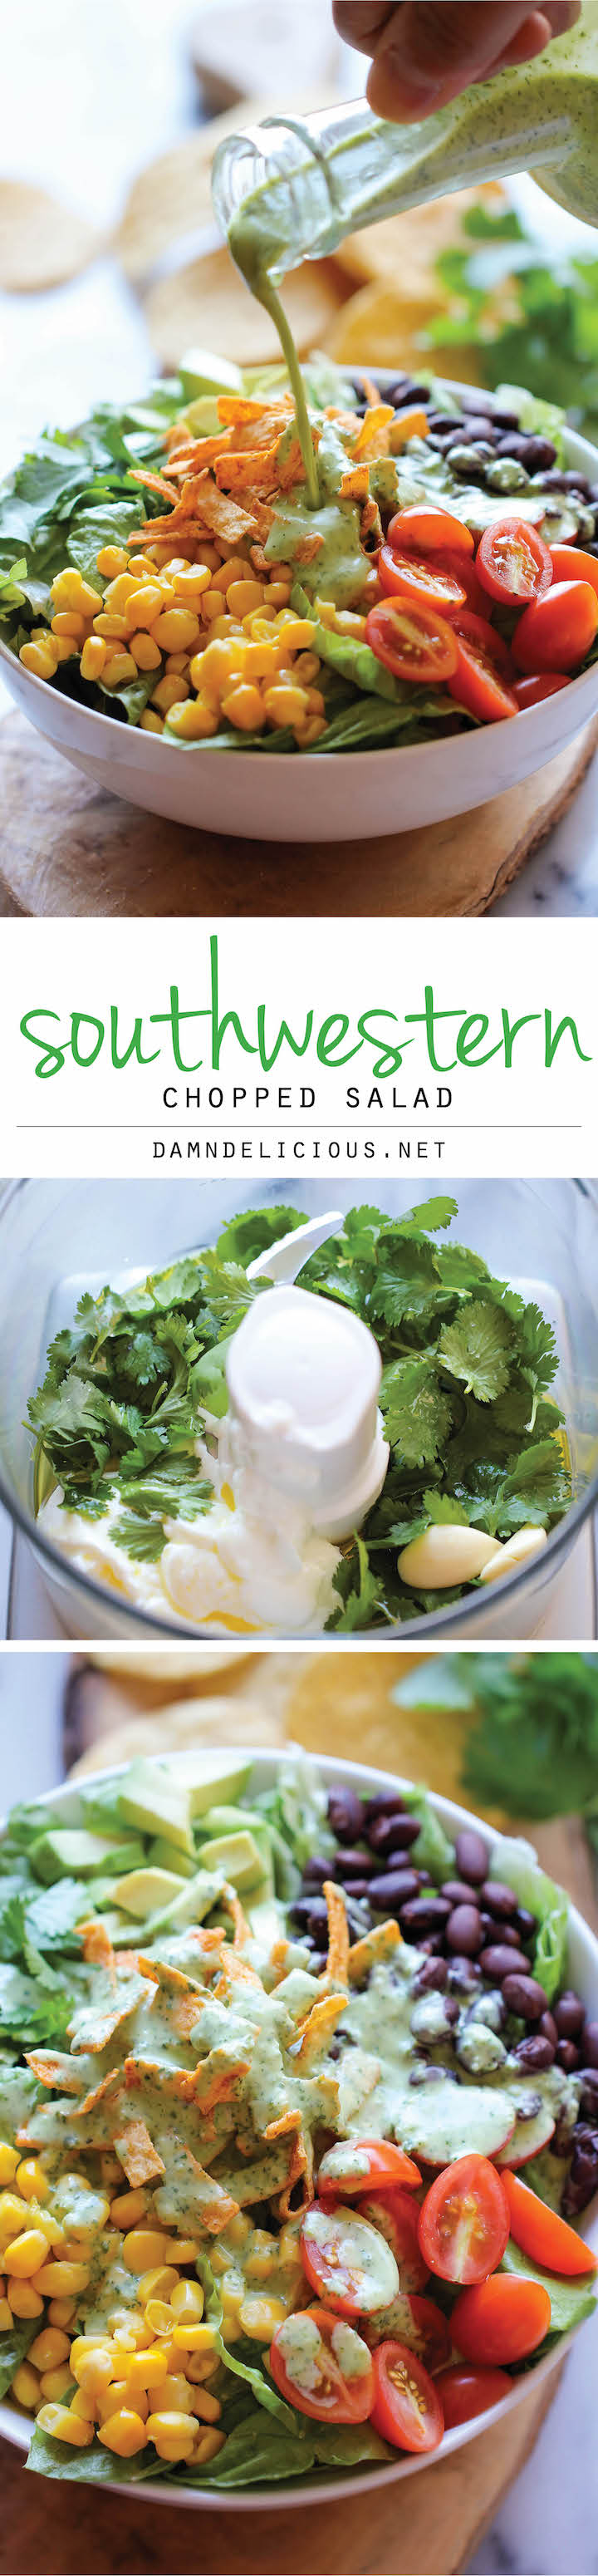 https://s23209.pcdn.co/wp-content/uploads/2014/01/Southwestern-Chopped-Salad-with-Cilantro-Lime-Dressing.jpg